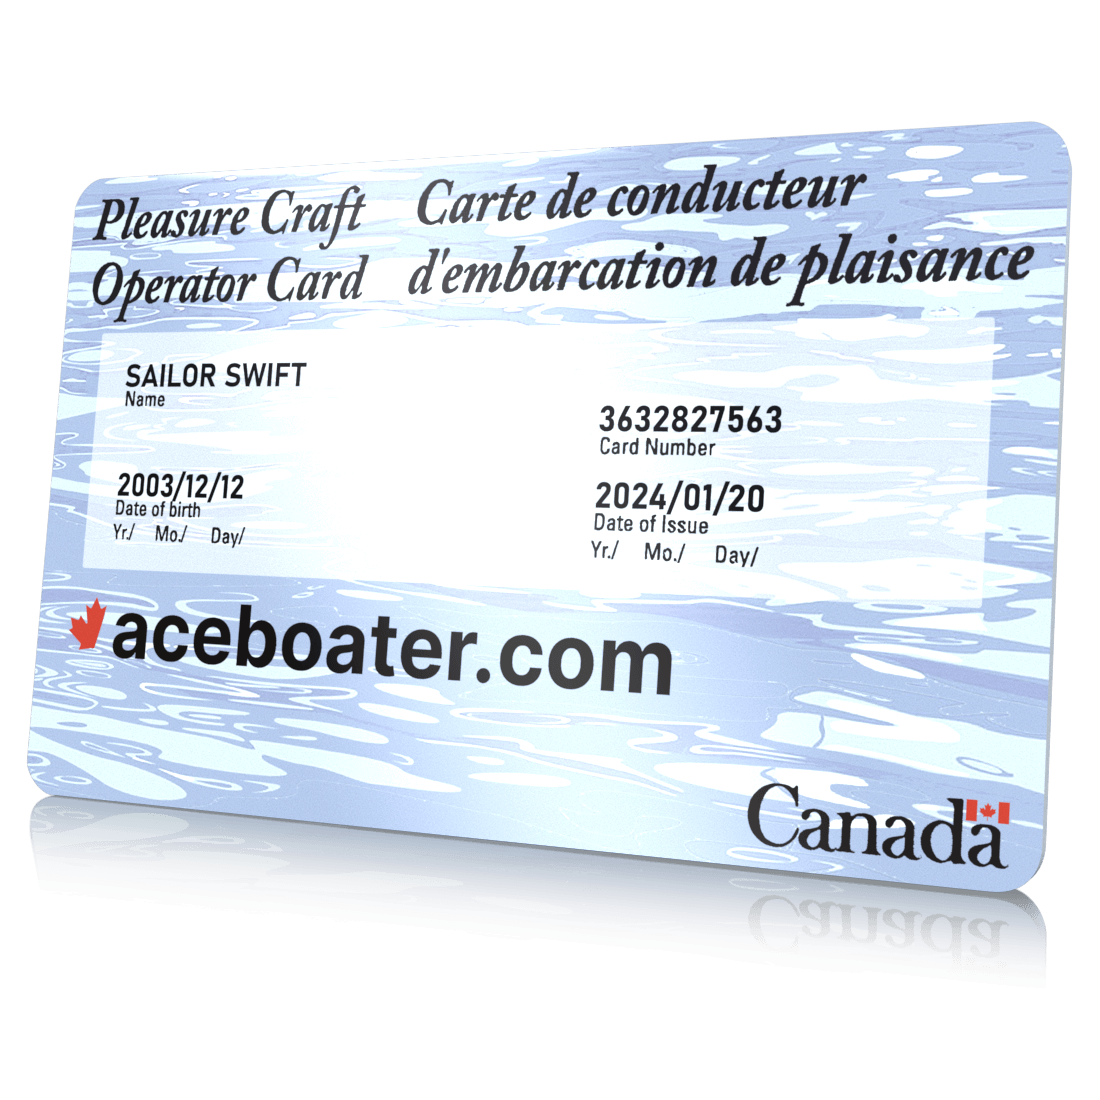 Aceboater Card Angle2 Hr ?width=1100&height=1100&name=aceboater Card Angle2 Hr 